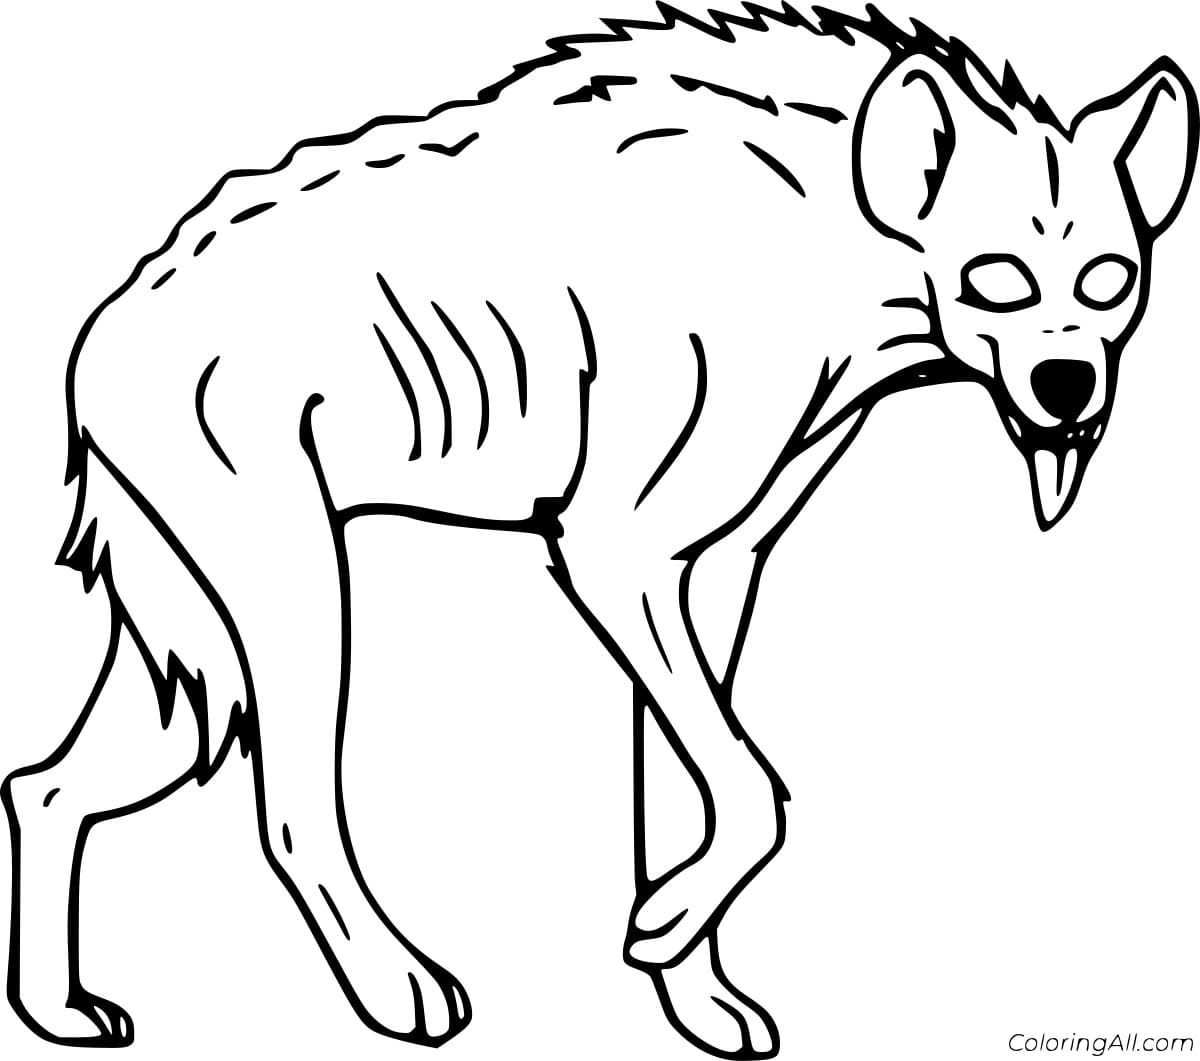 Hungry Hyena Free Coloring Page